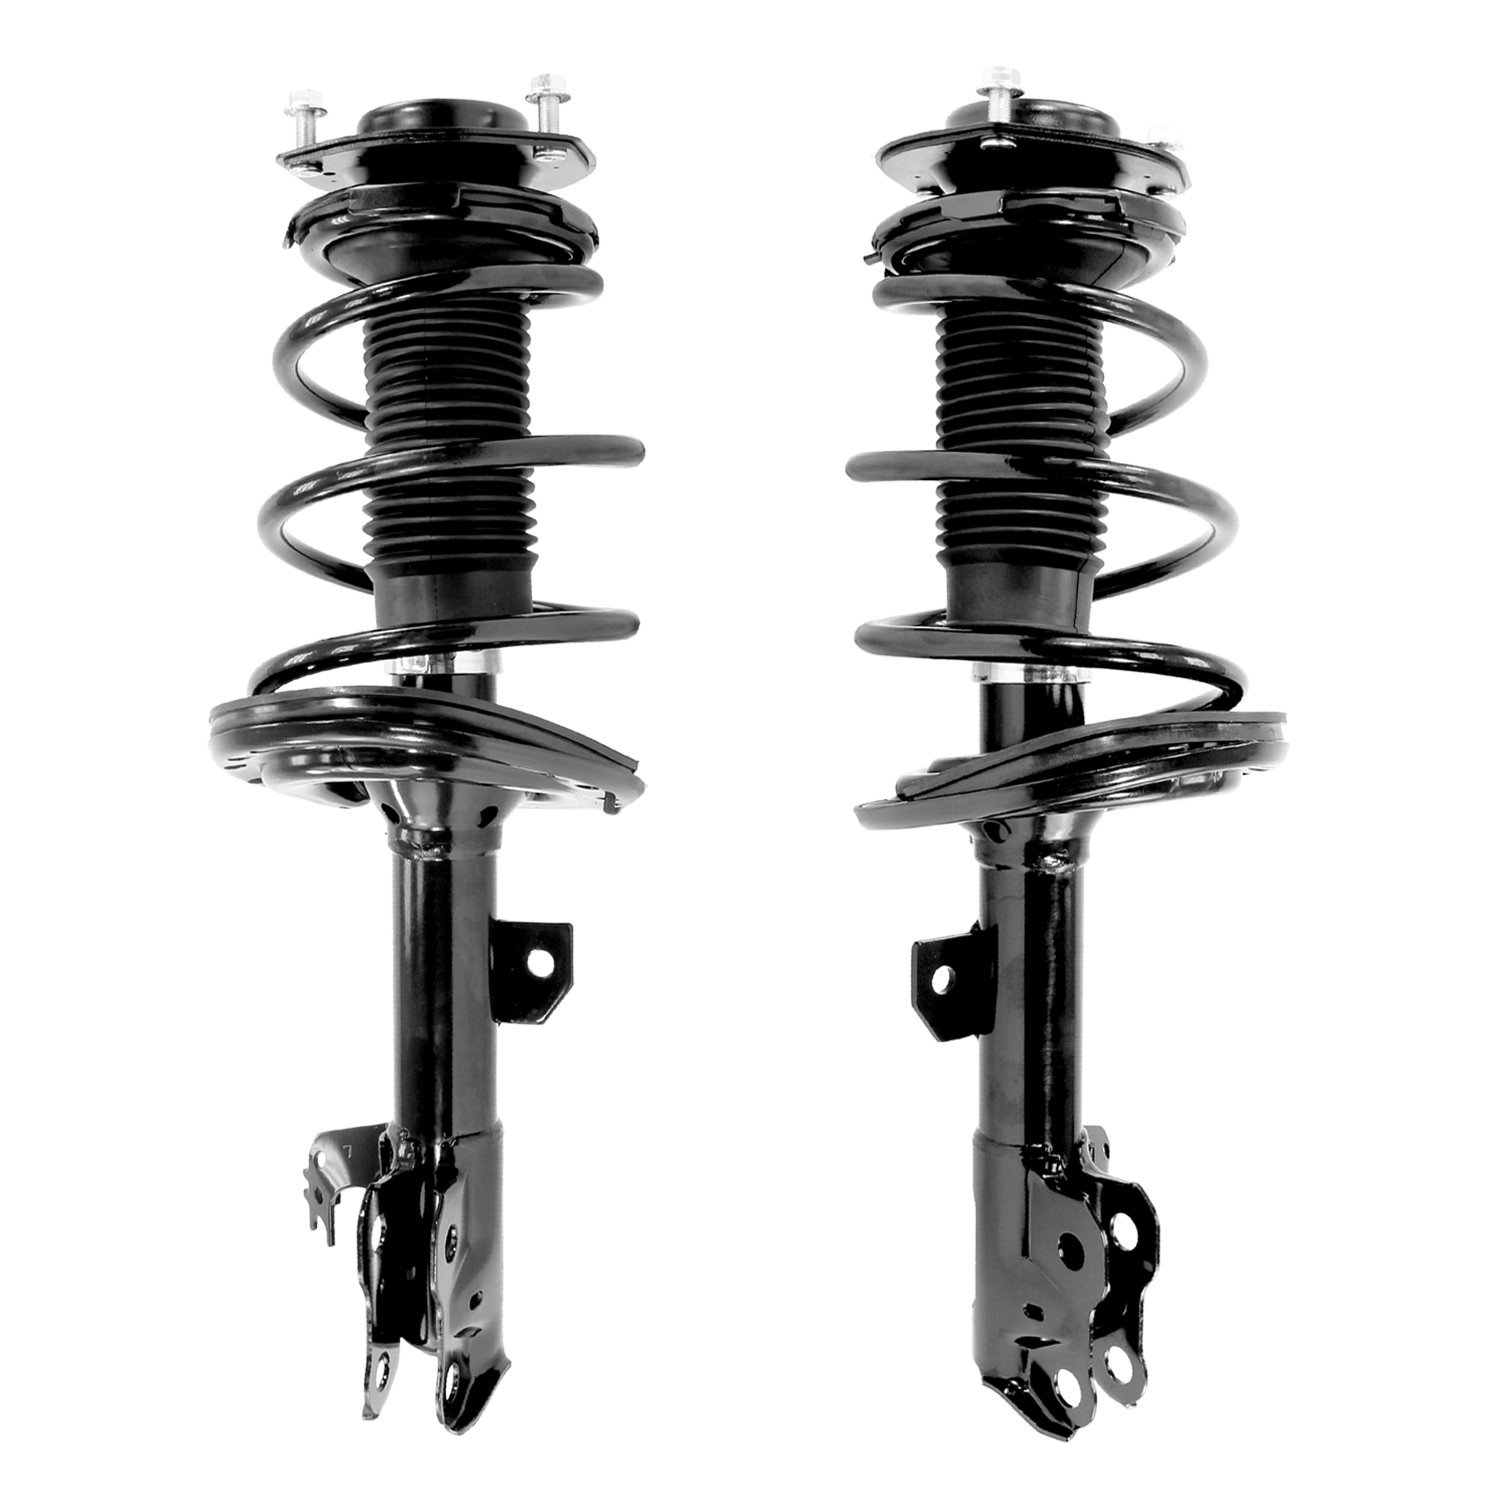 2-11975-11976-001 Suspension Strut & Coil Spring Assembly Set Fits Select Toyota Camry